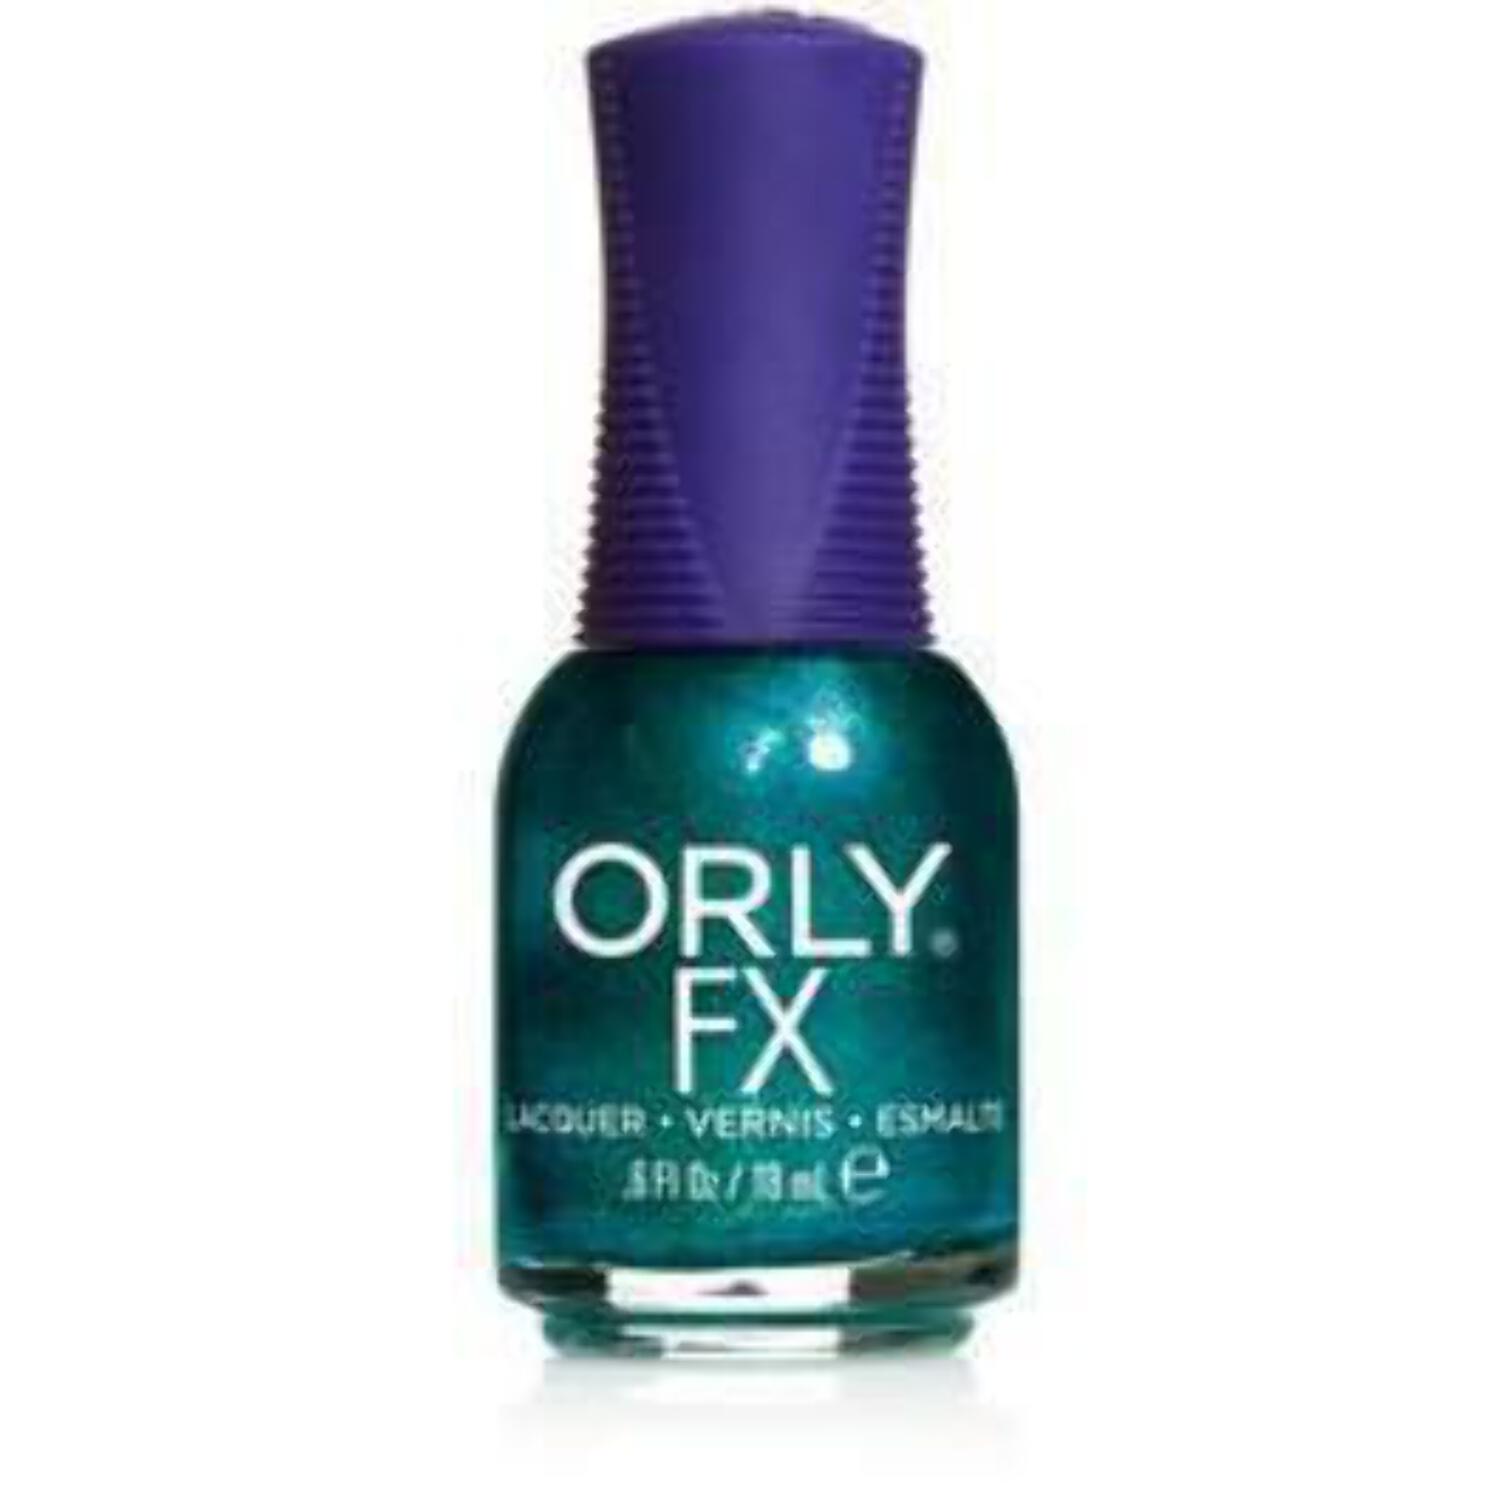 Orly Nail Lacquer Cosmic FX - Halley's Comet - #20081 - image 1 of 1